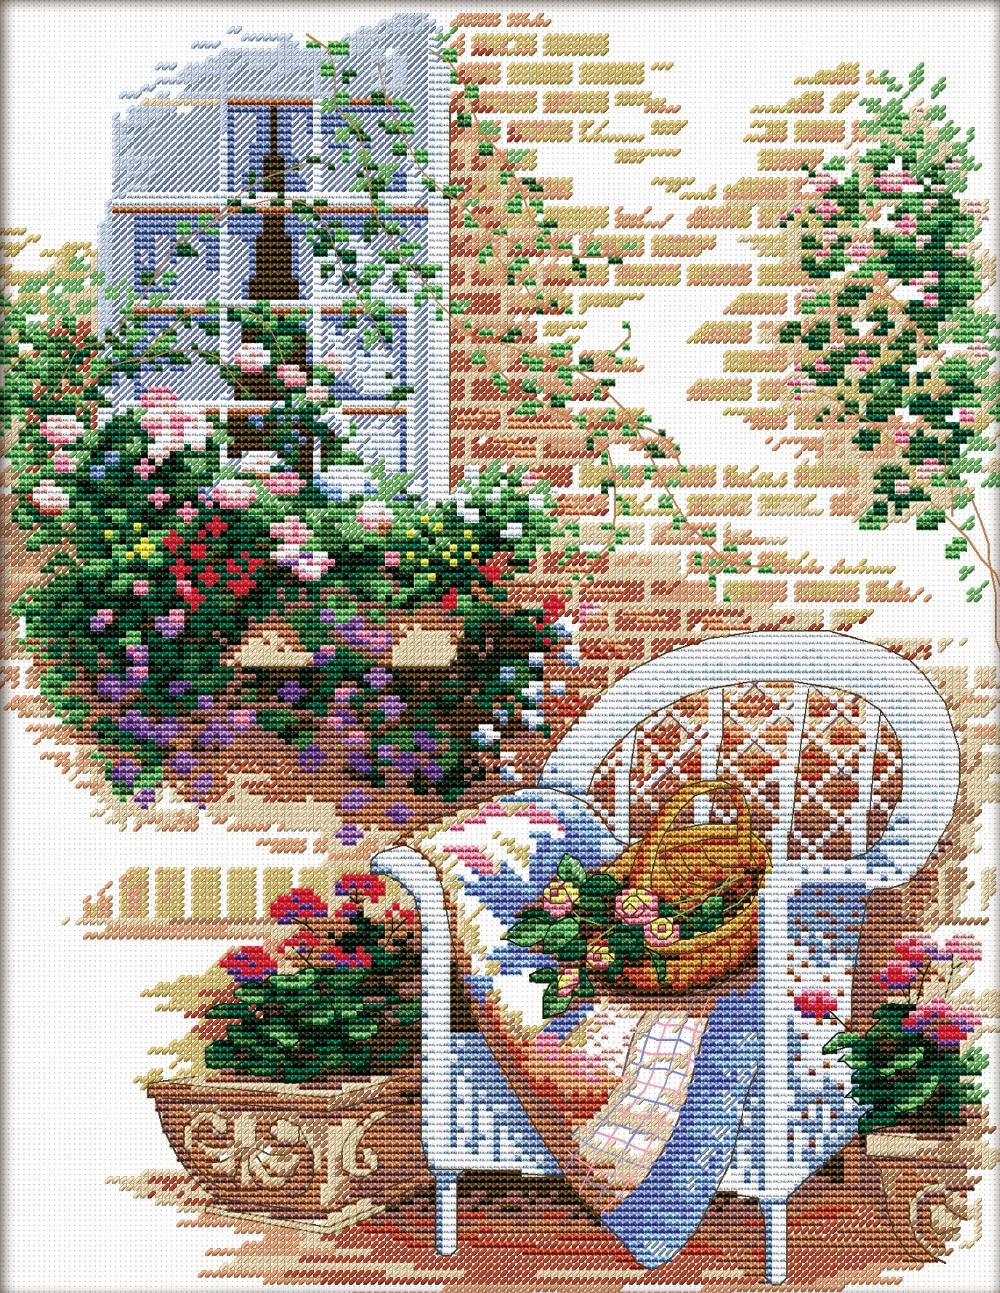 Stamped Embroidery Patterns Us 1199 40 Offstamped Counted Cross Stitch Patterns Flowering Windowsill Embroidery Kits 11ct Cotton Thread Painting Diy Needlework Home Decor In